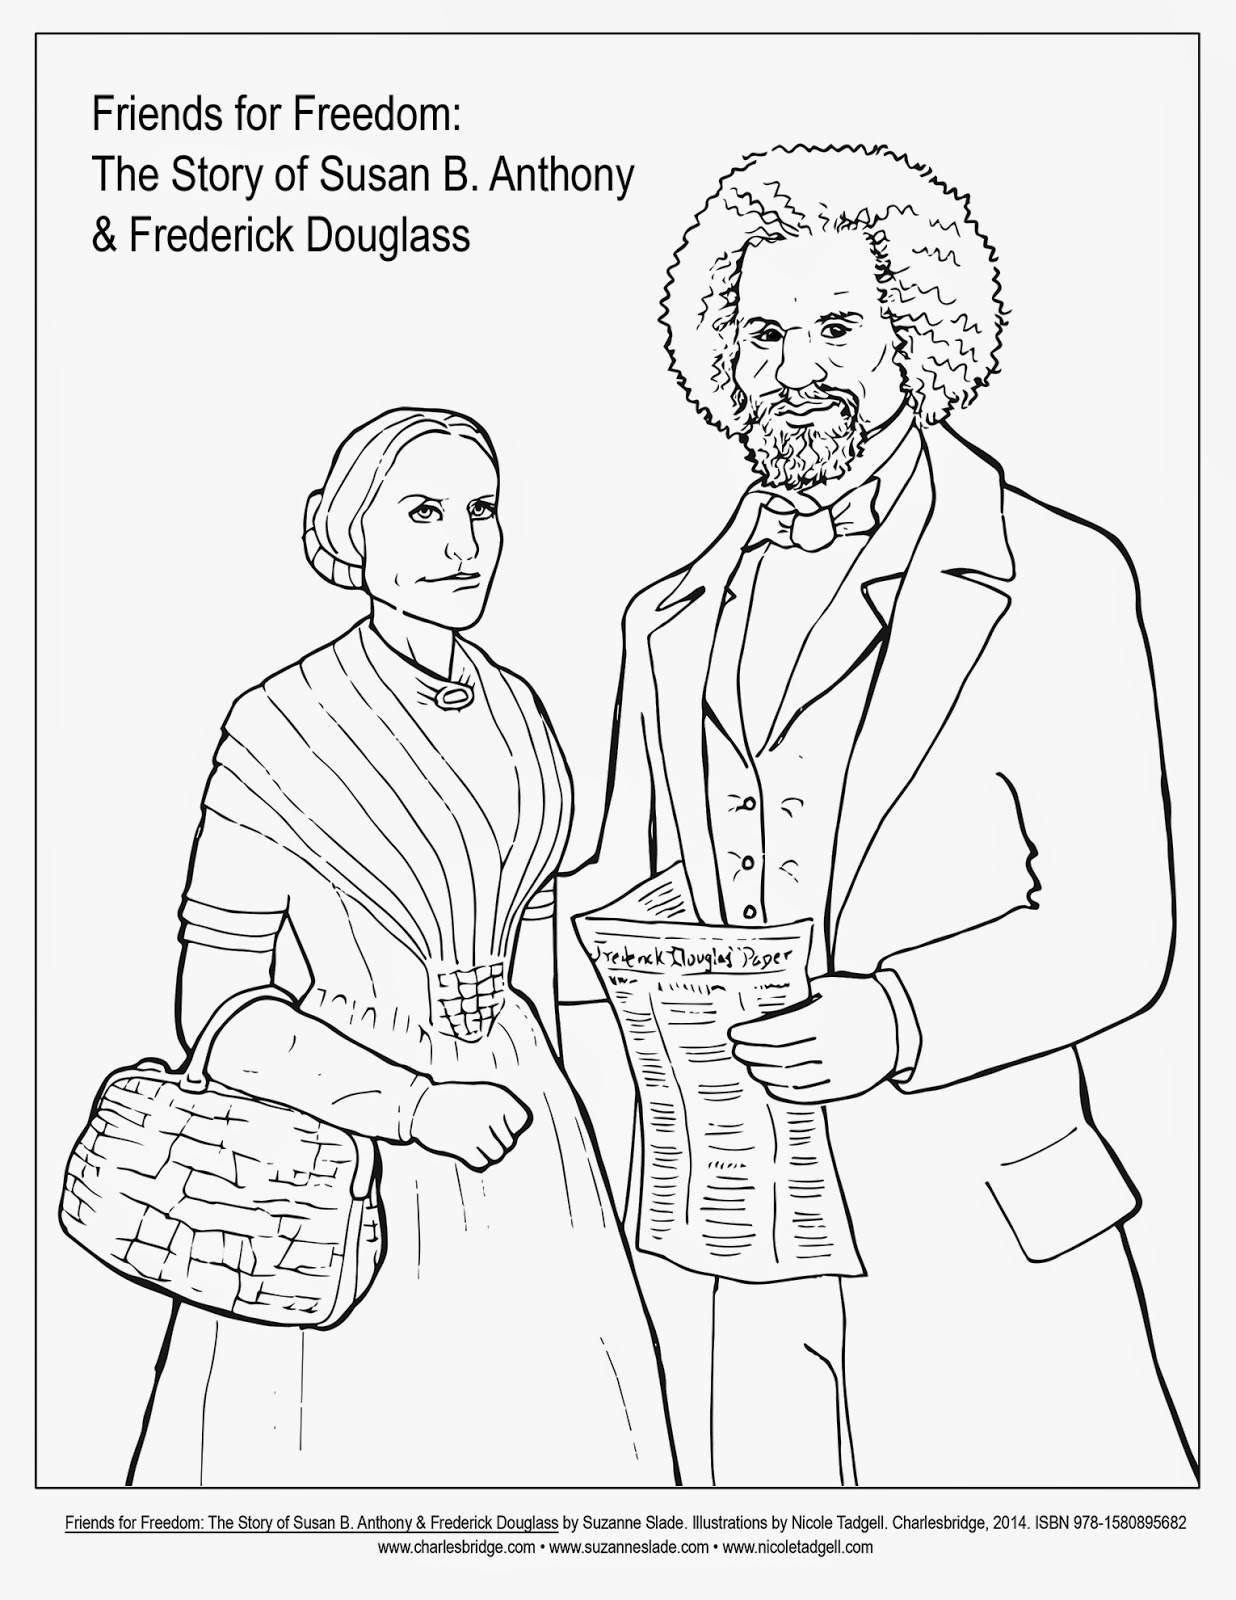 Nicole Tadgell Illustration: Coloring Pages for Friends for Freedom!